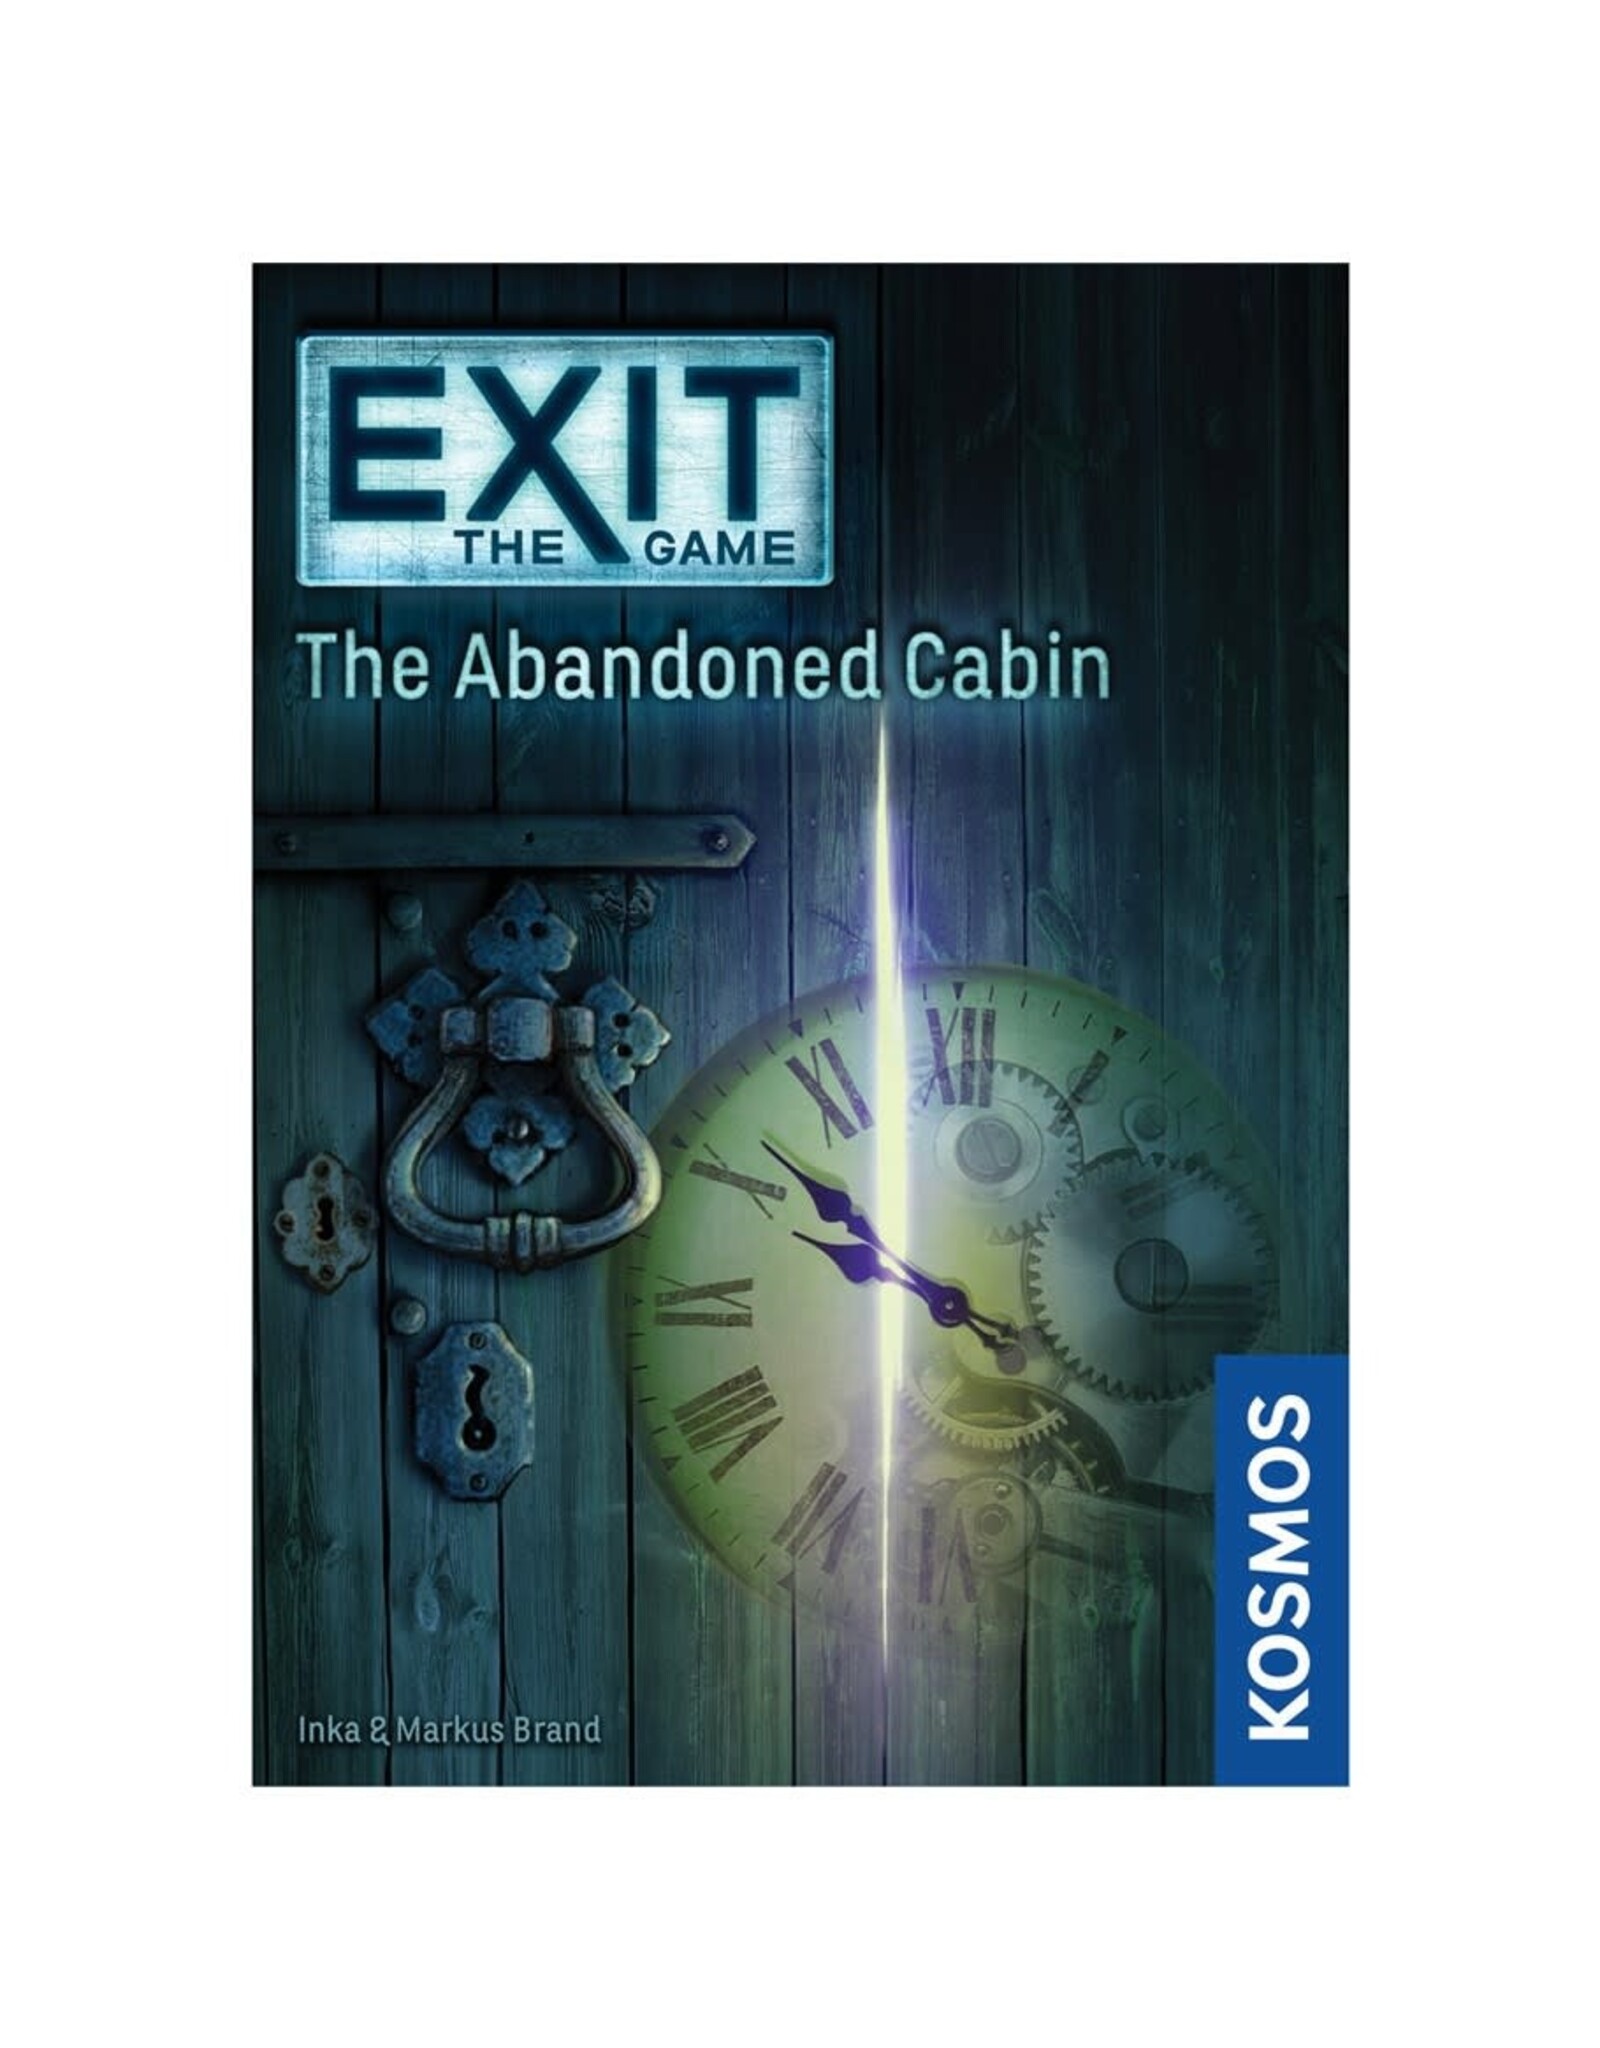 Thames & Kosmos Exit: The Abandoned Cabin